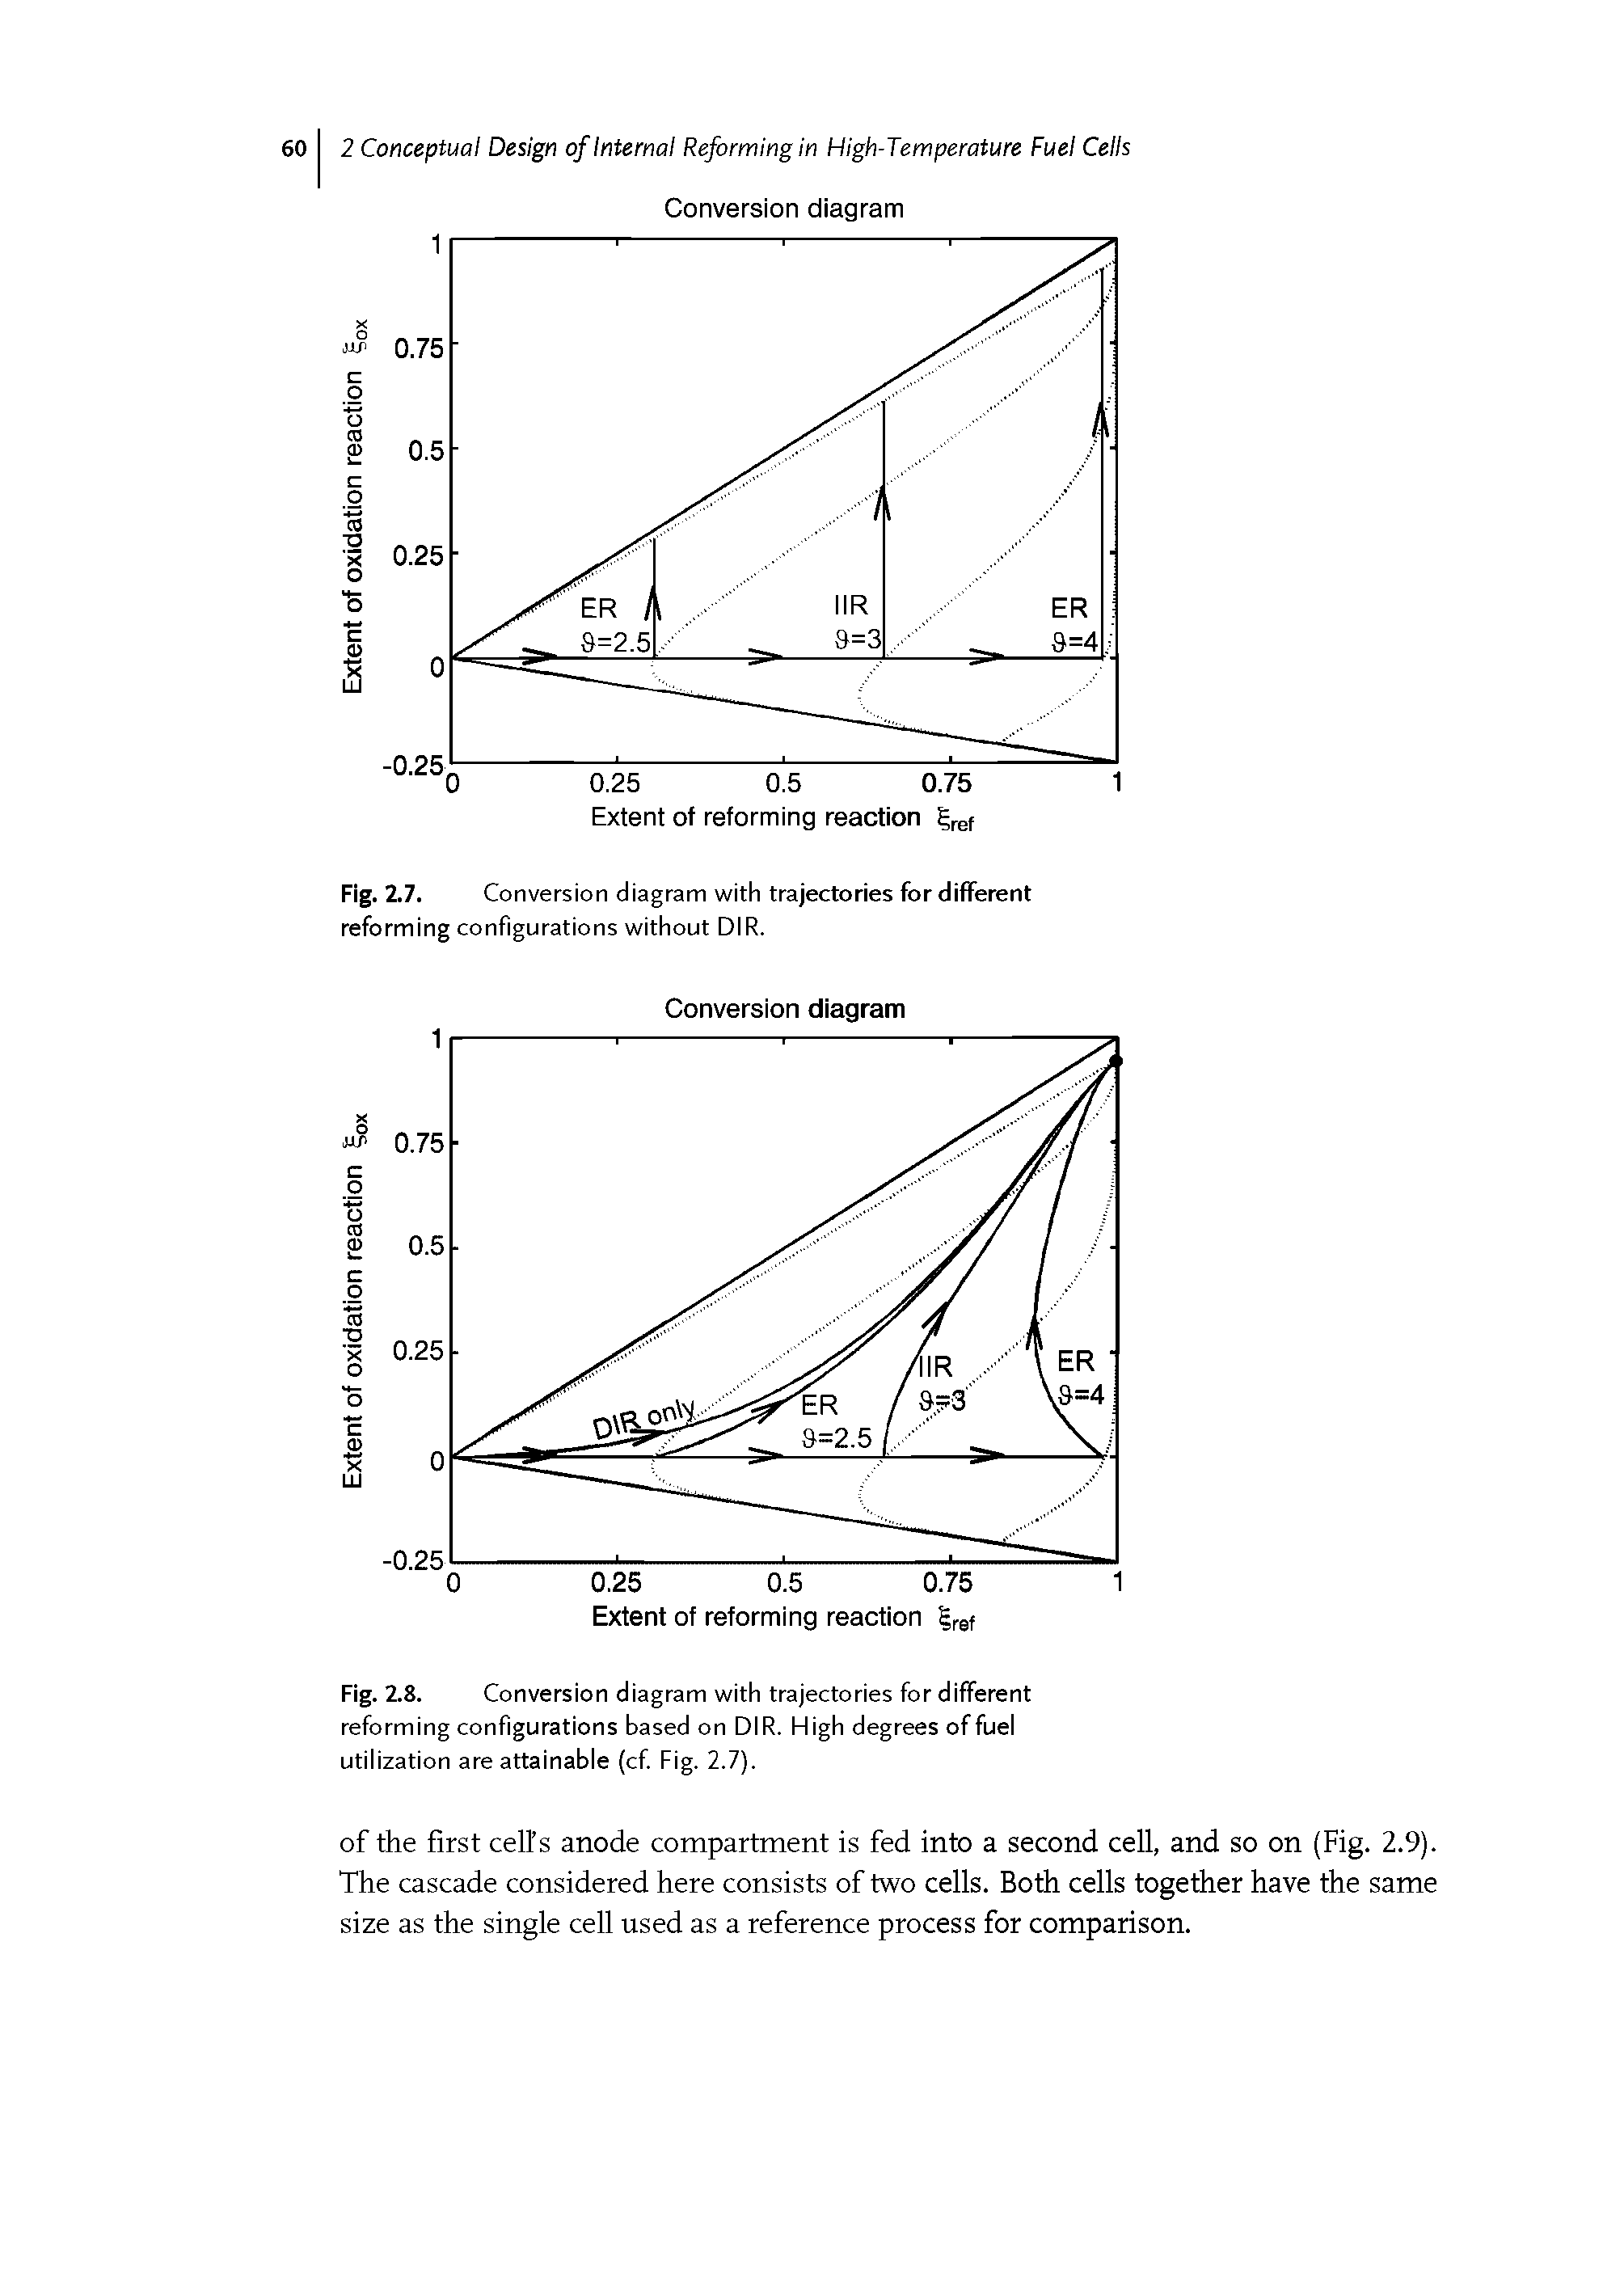 Fig. 2.8. Conversion diagram with trajectories for different reforming configurations based on DIR. High degrees of fuel utilization are attainable (cf. Fig. 2.7).